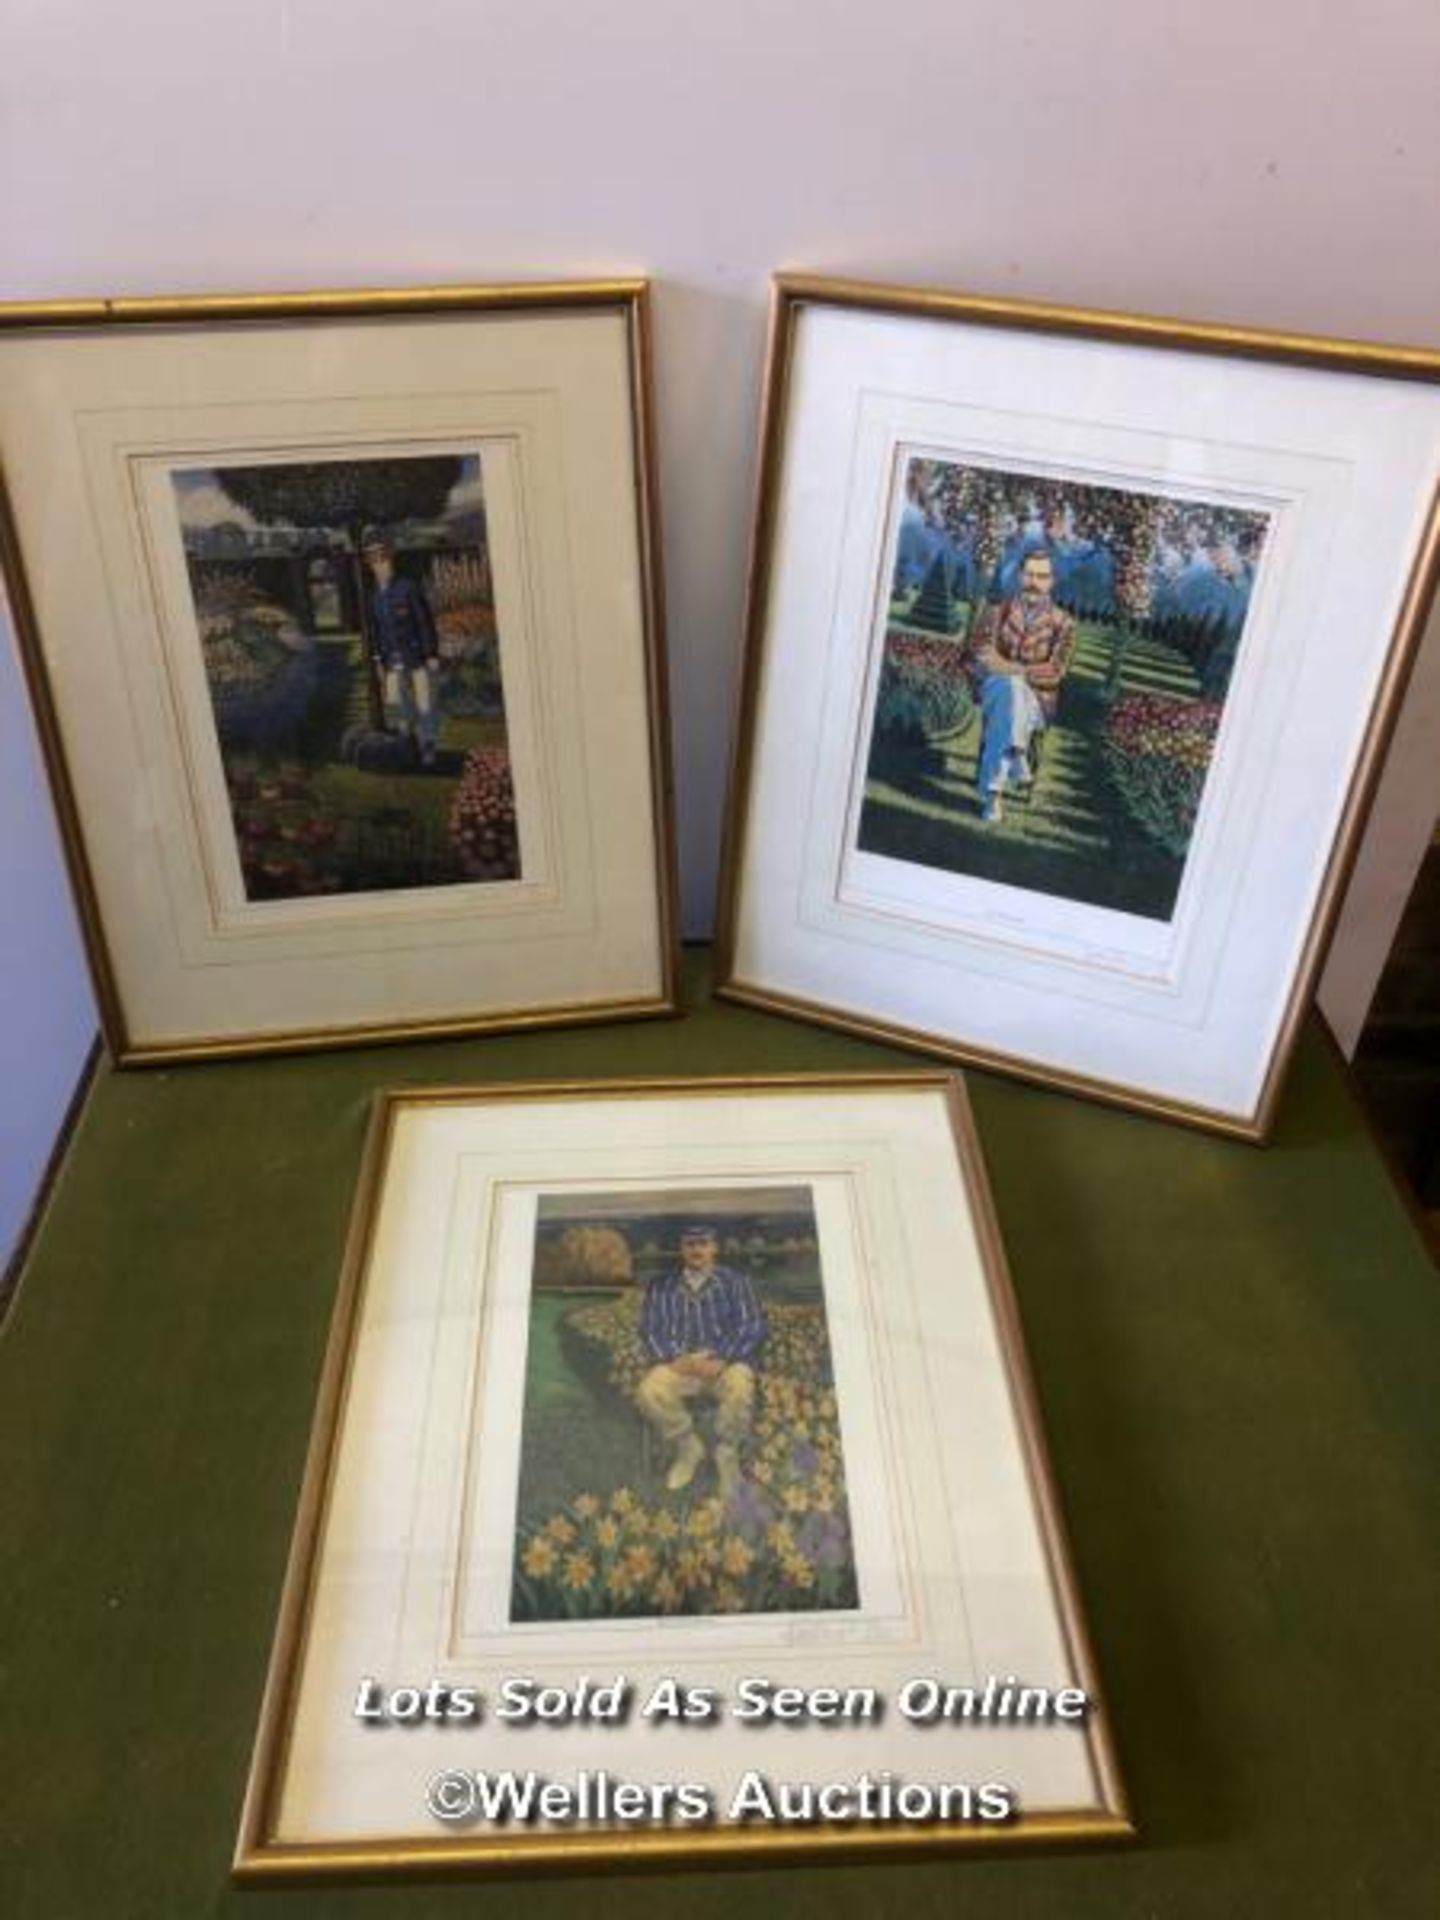 THREE FRAMED AND GLAZED PRINTS OF G L JESSOP, A E STODDART AND BILL LOCKWOOD BY GERRY WRIGHT TAKEN